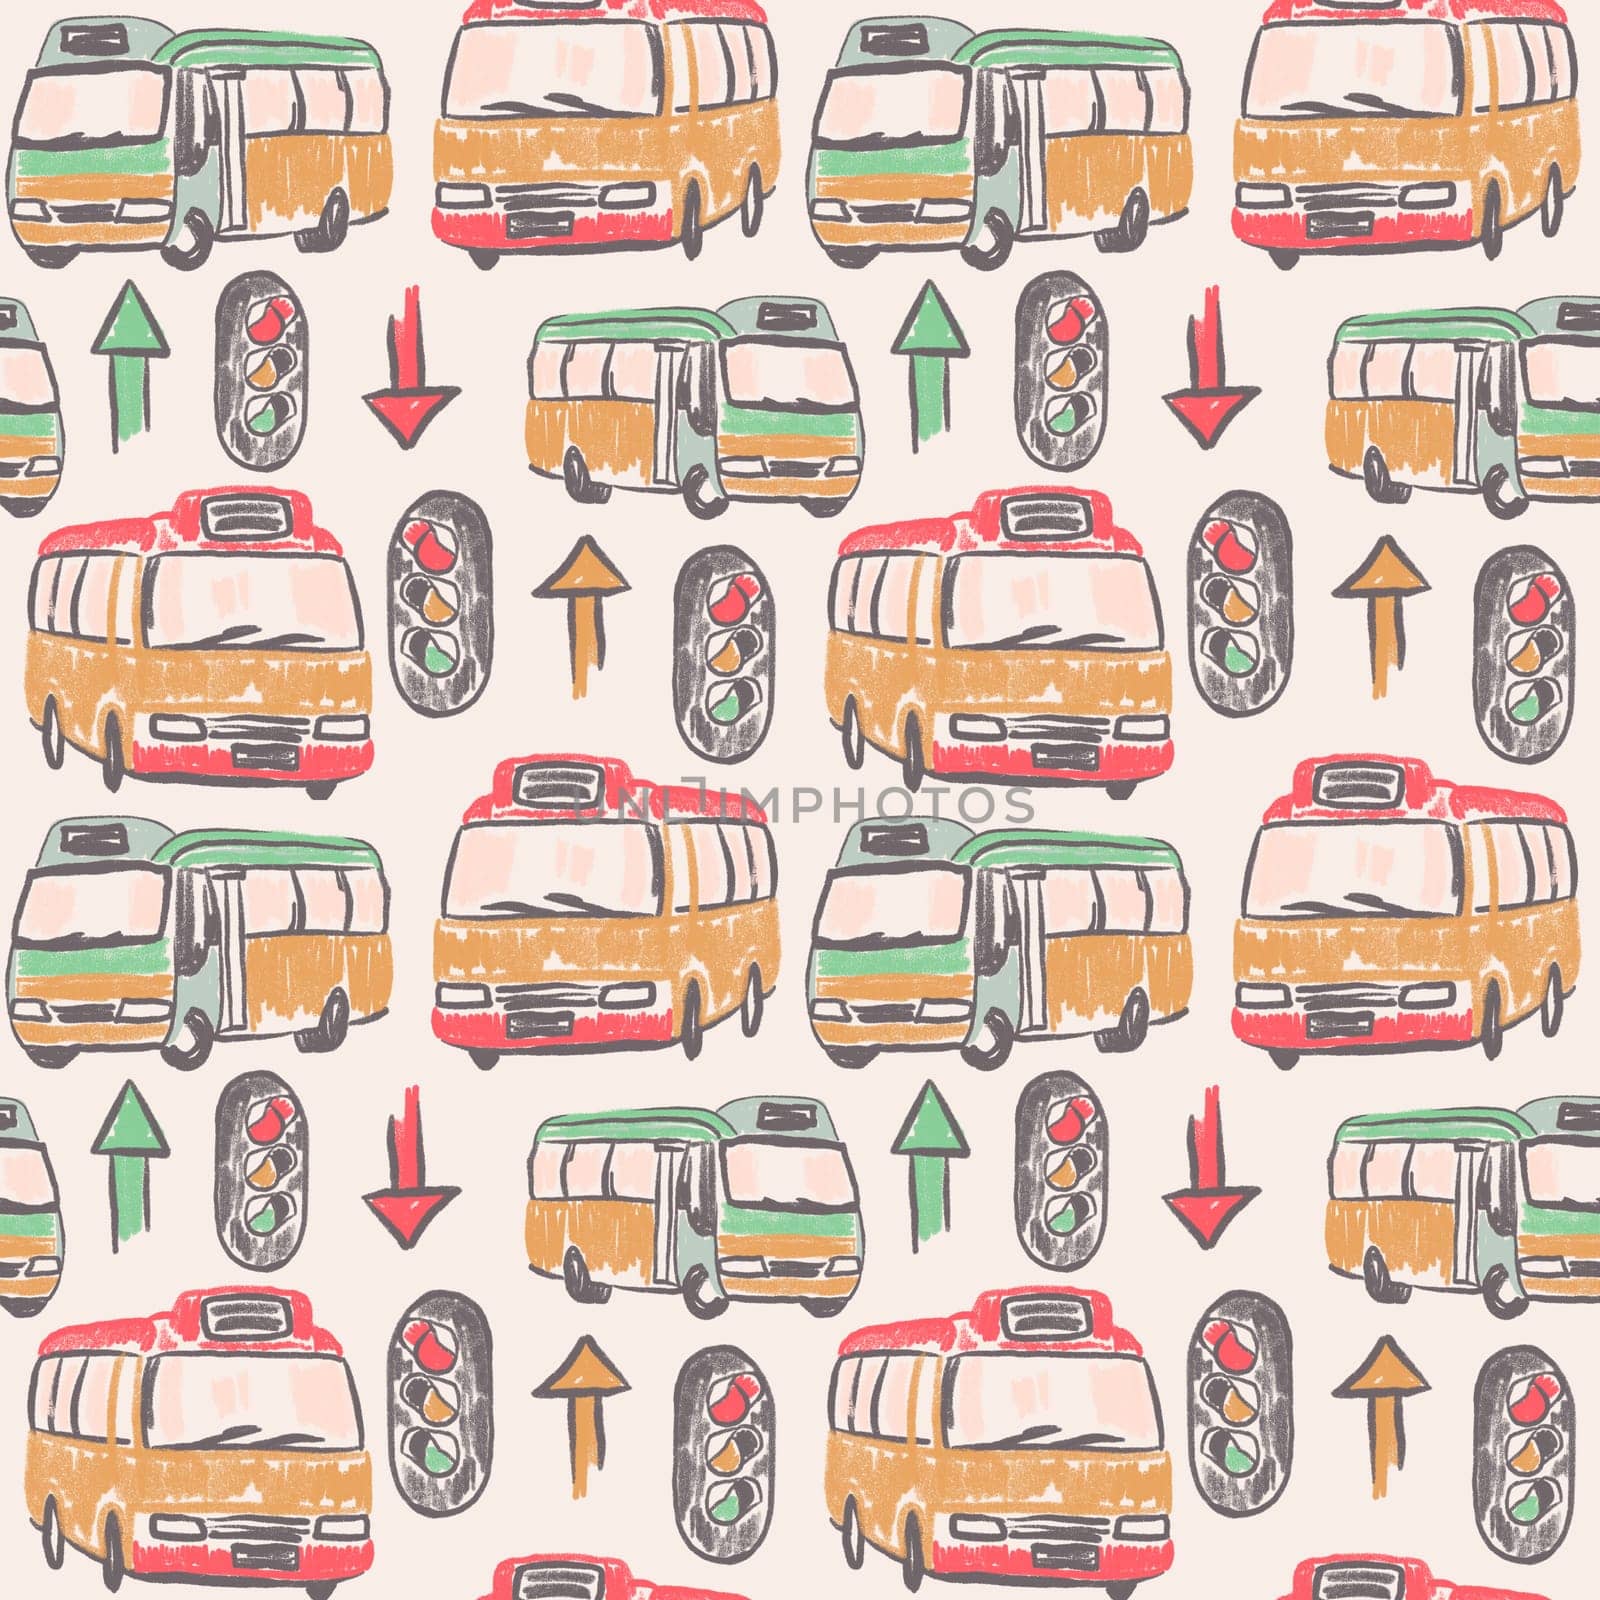 Hand drawn seamless vintage pattern with buses traffic light public transport. Retro asian hong kong cars automobile graphic doodle yellow beige red print, trendy decorative fabric vehicle cartoon